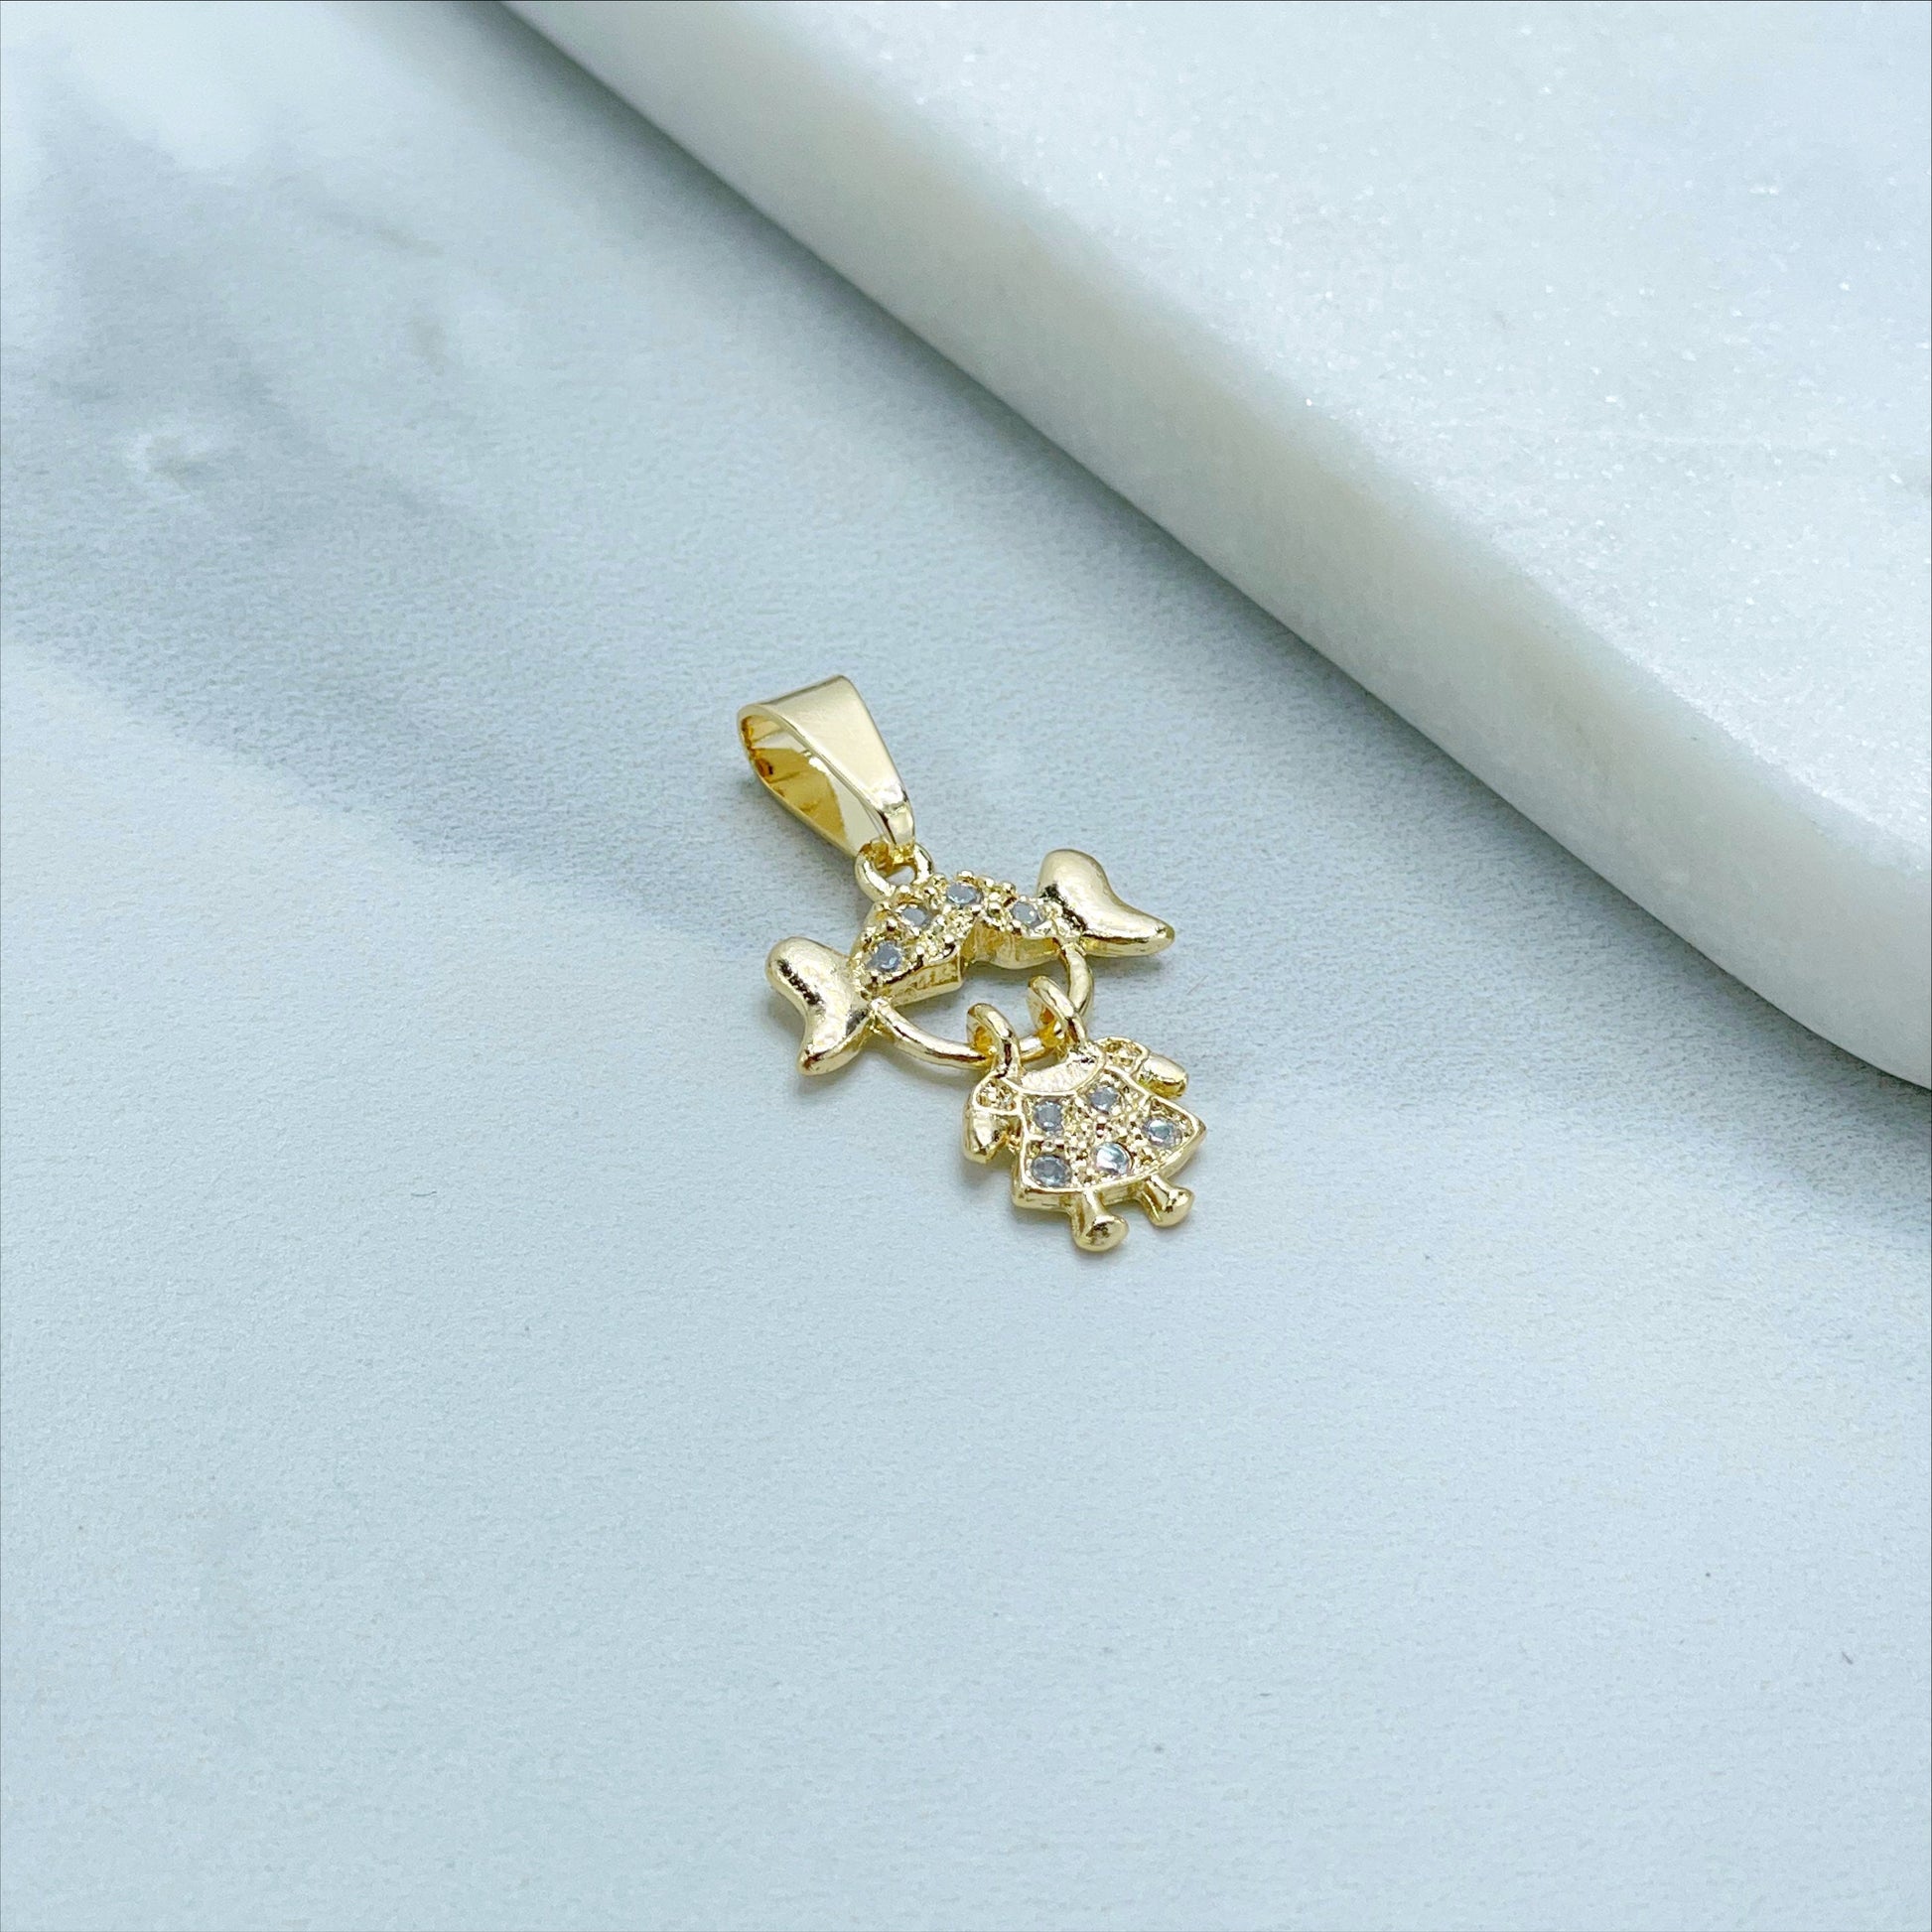 18k Gold Filled Boy or Girl Charms Pendant with Cubic Zirconia, Moving Head, for Wholesale and Jewelry Supplies, Family Jewelry For Mother